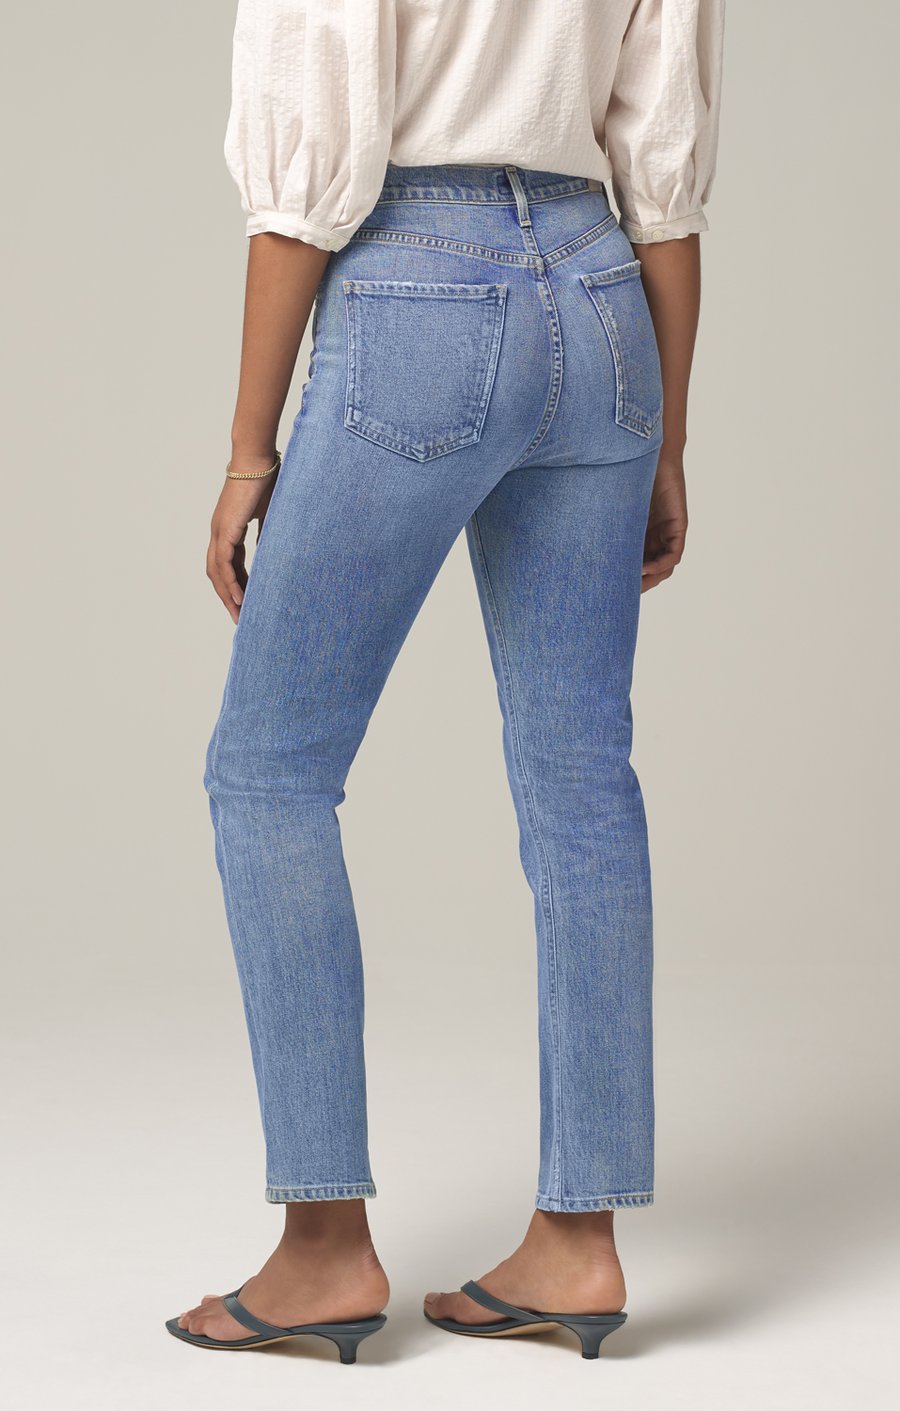 Citizens of Humanity - Charlotte High Rise Straight Jeans in Taboo